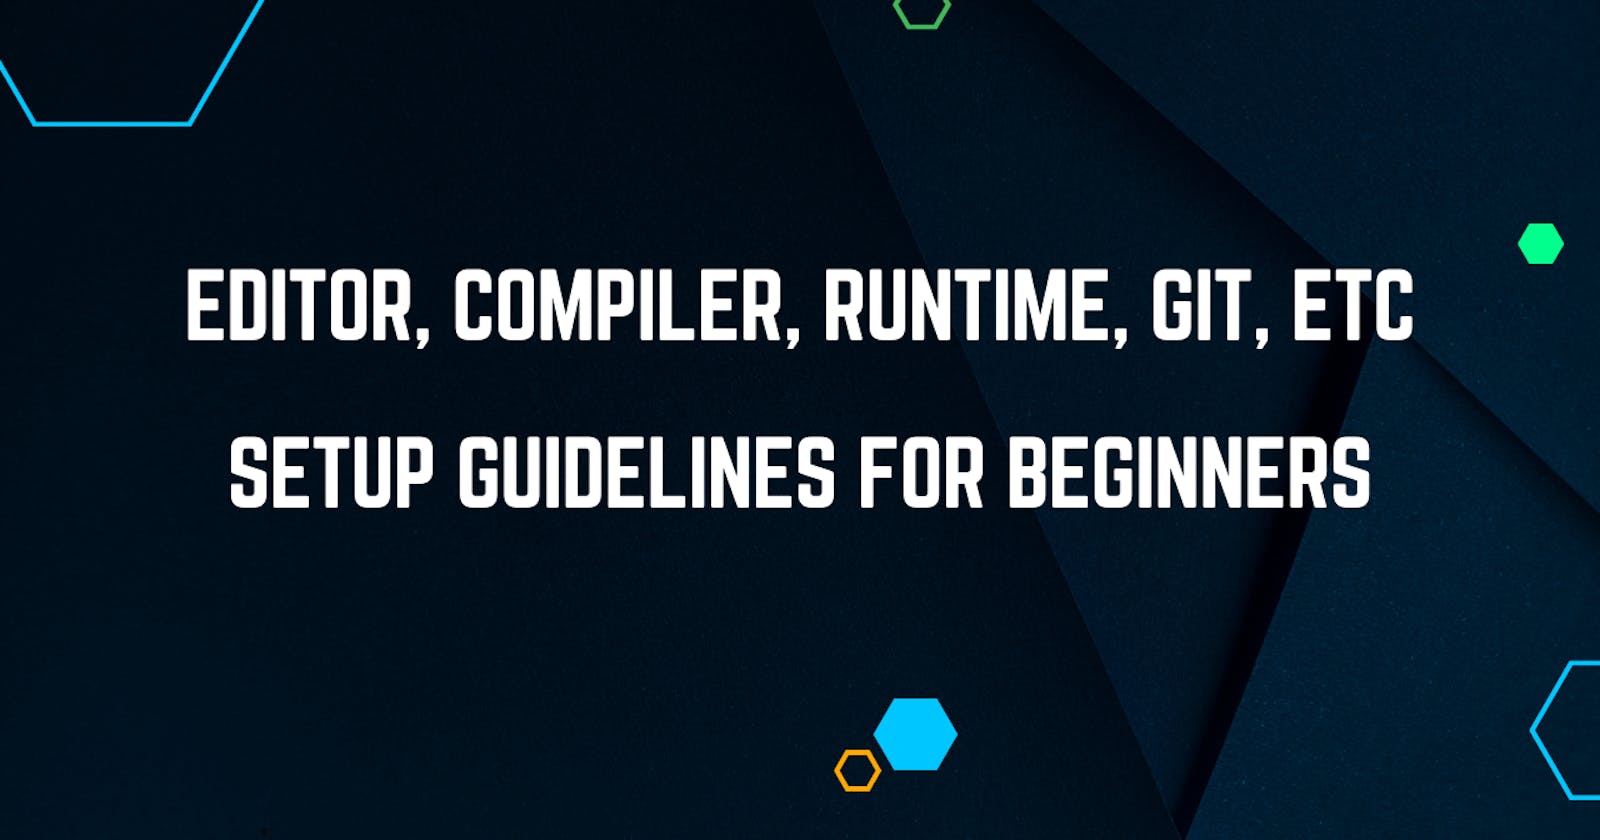 Editor, Compiler, Runtime, etc Setup guidelines for Beginners